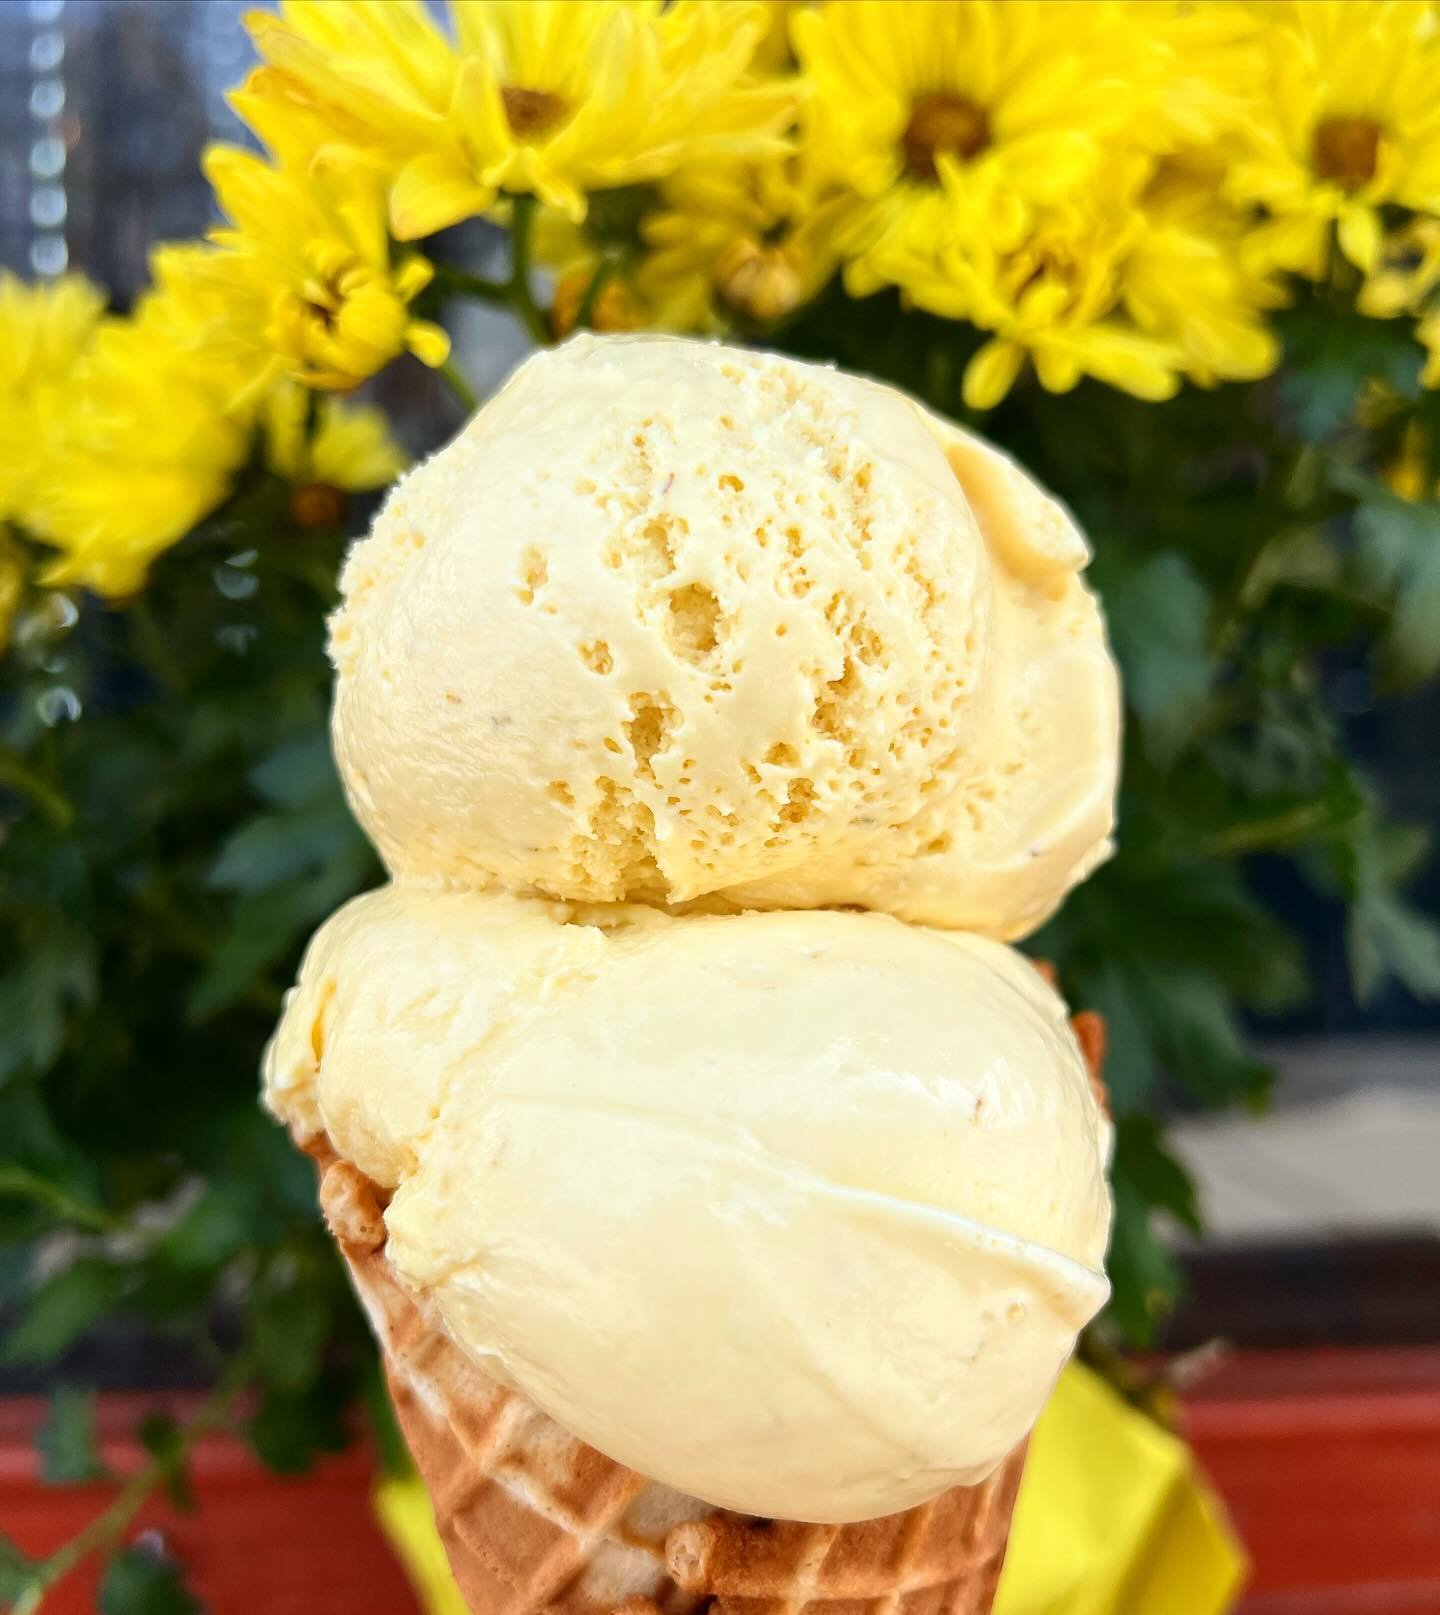 Another flavor that we are in loooove with&hellip;

🌼CHAMOMILE HONEY🍯

This is truly a scoop of sunshine. For everyone out there who loves a honey sweetened cup of chamomile tea, you are going to need to try this&hellip;💗